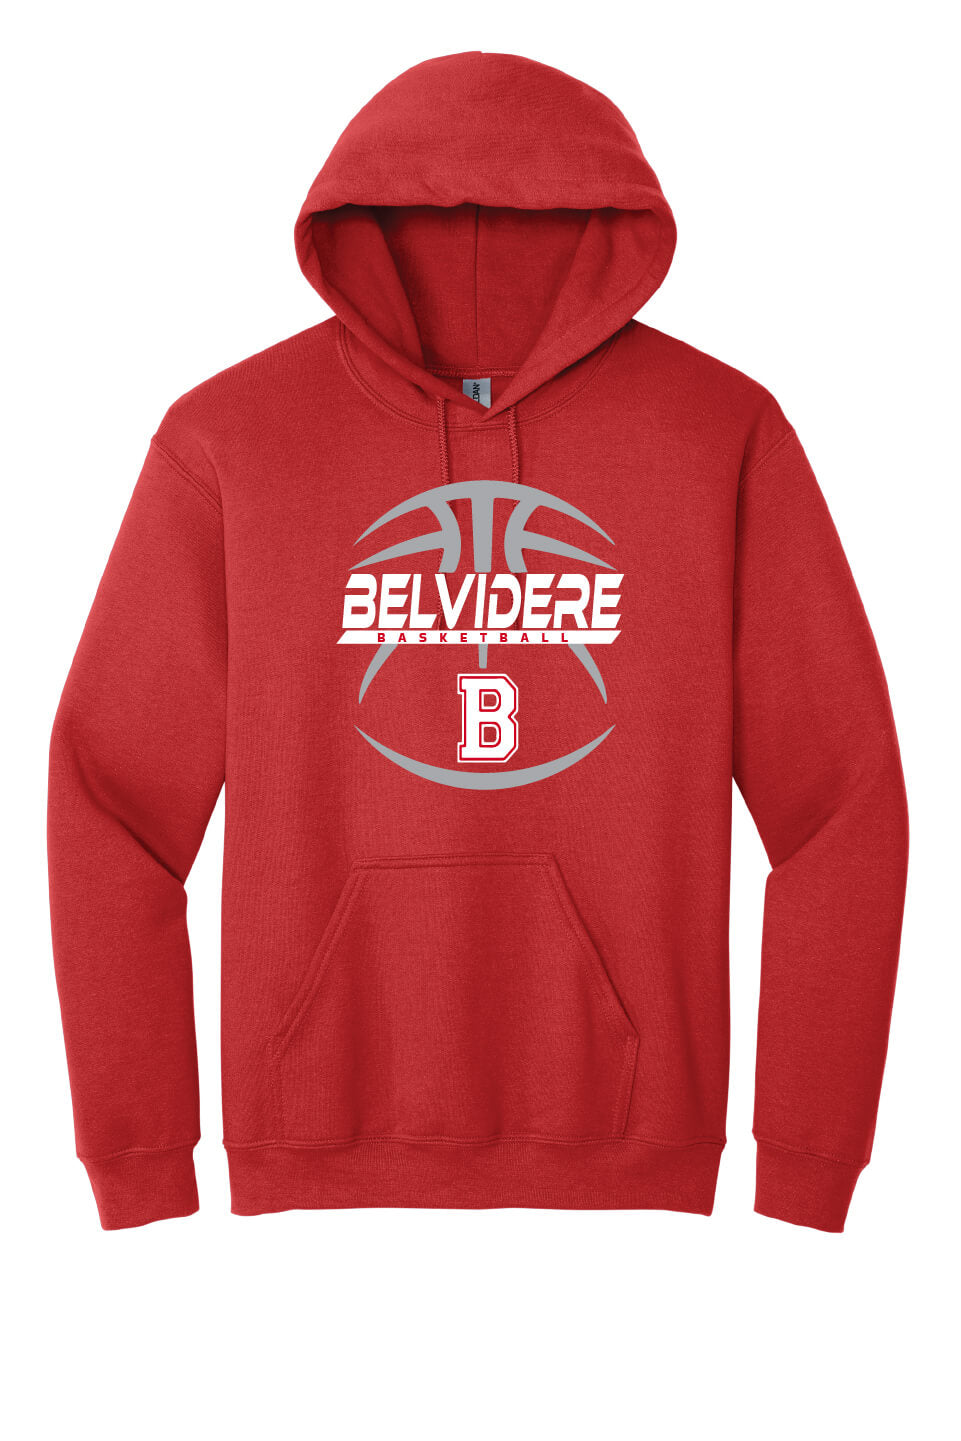 Hoodie (Youth) red